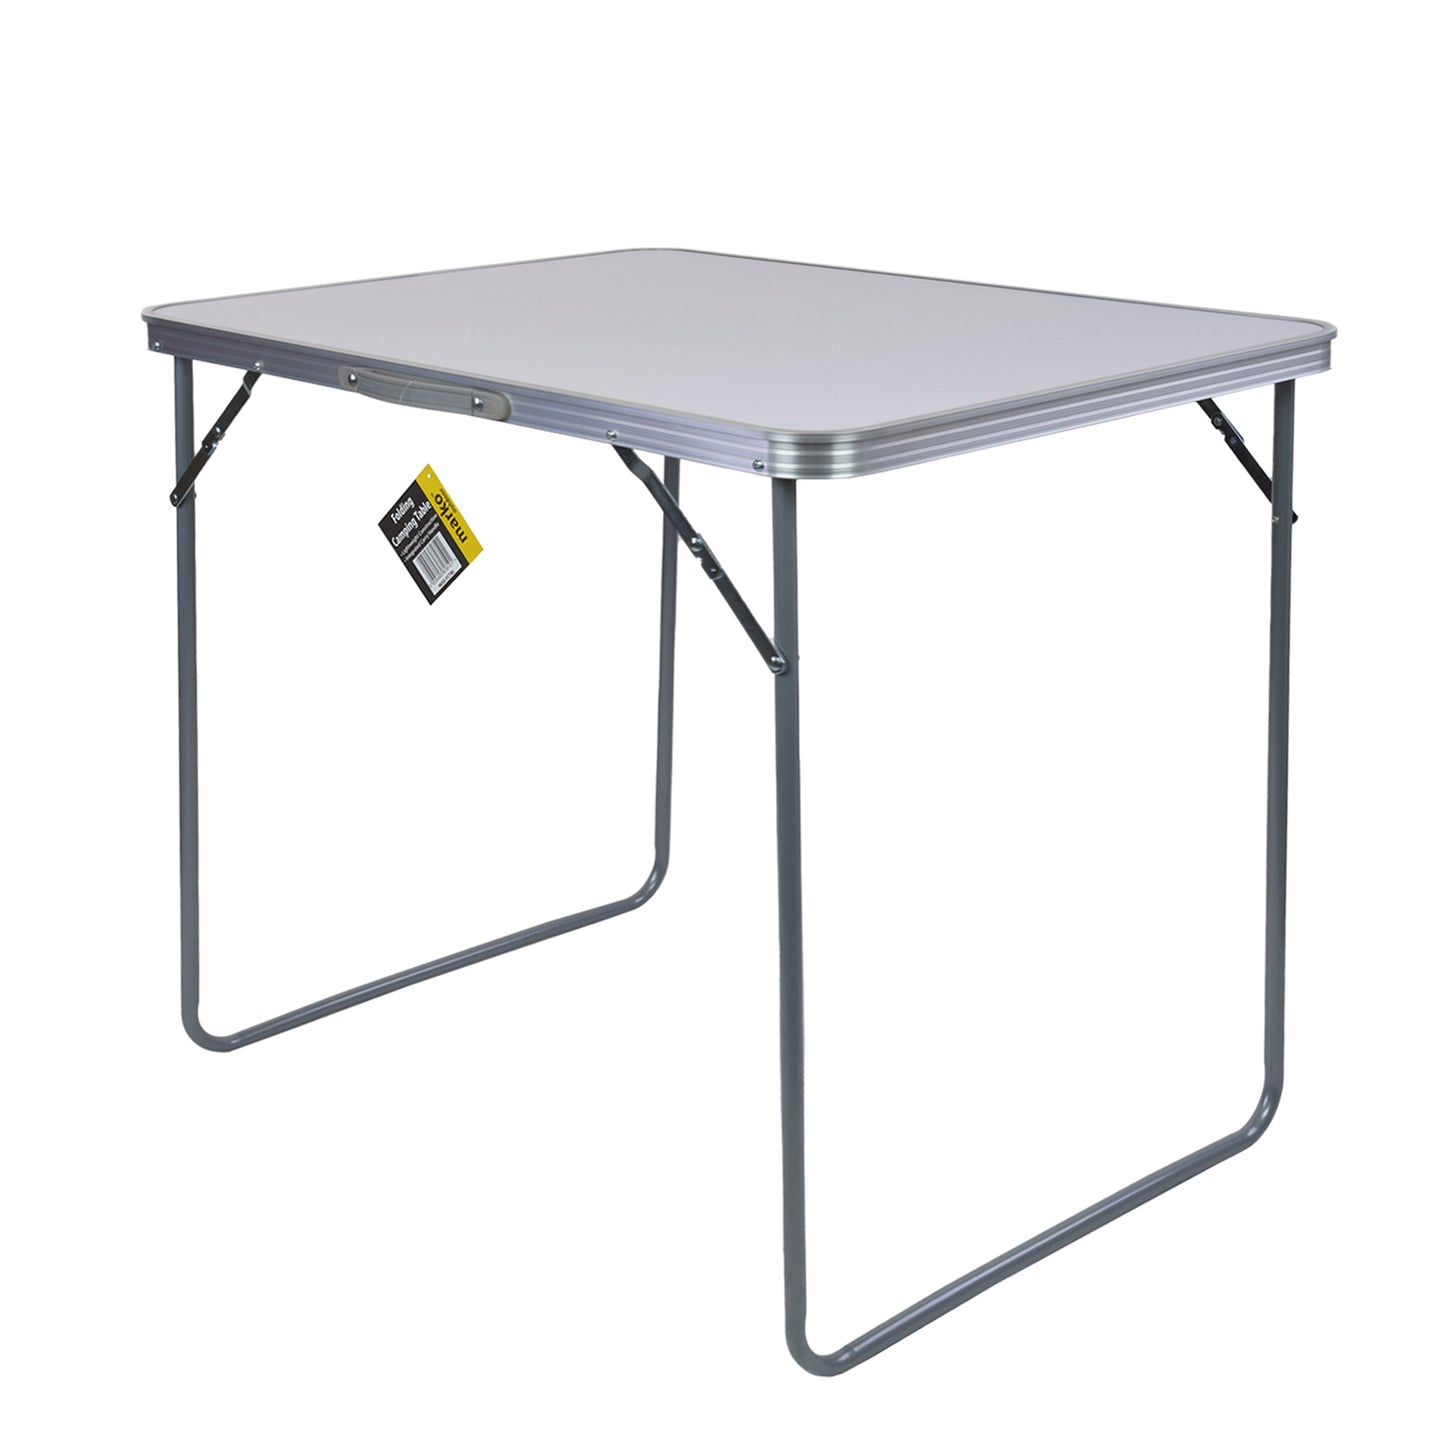 80cm Folding Camping Table